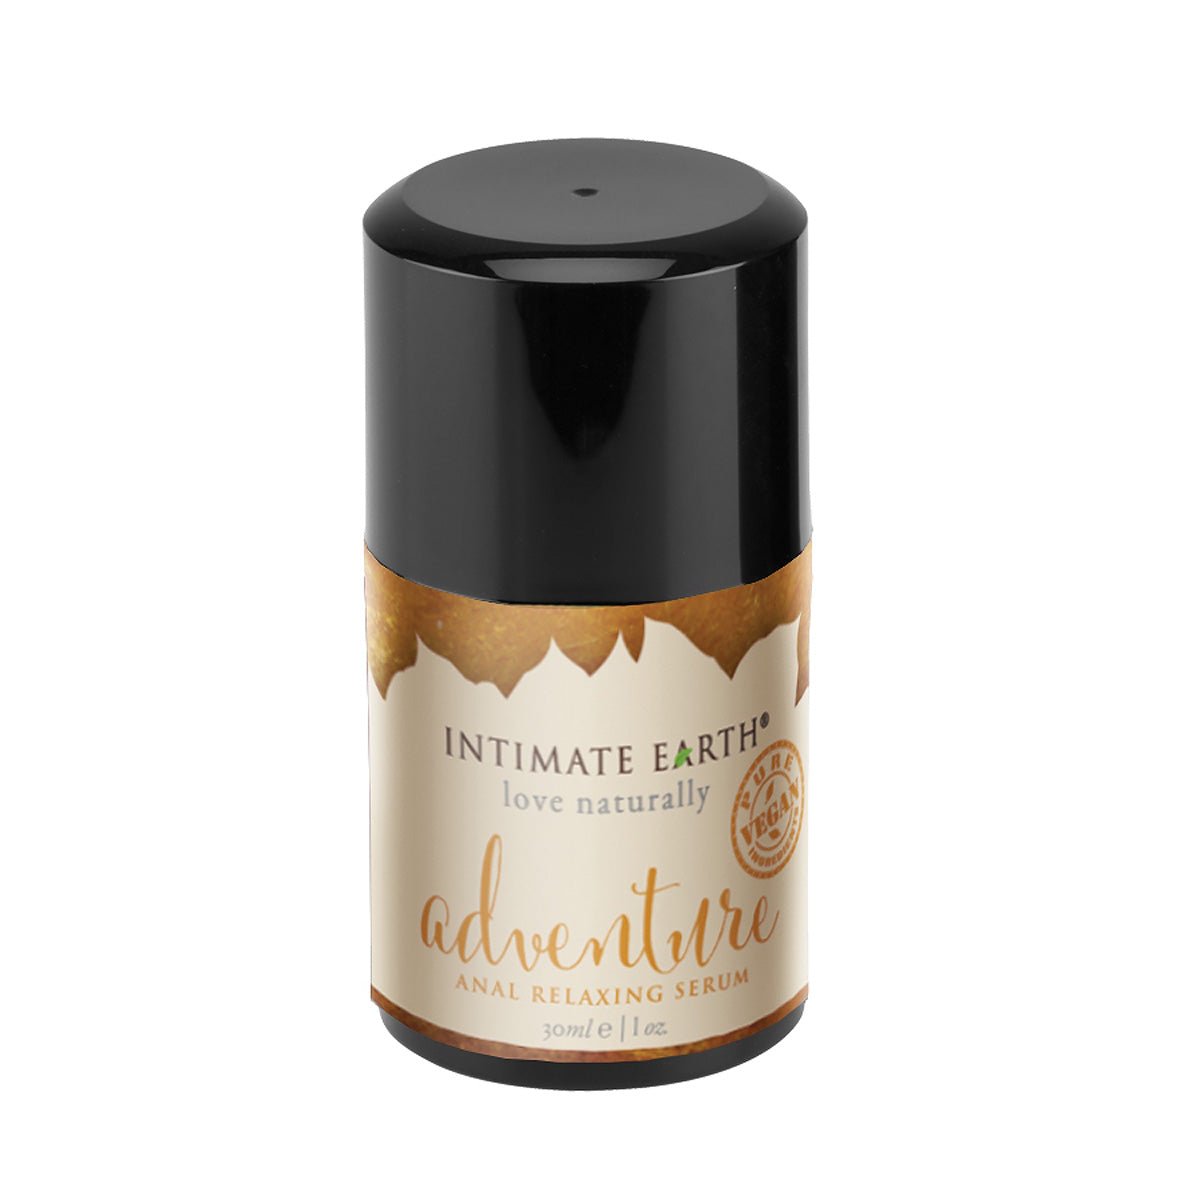 Intimate Earth Adventure Anal Relaxing Serum 1oz Anal Lubes